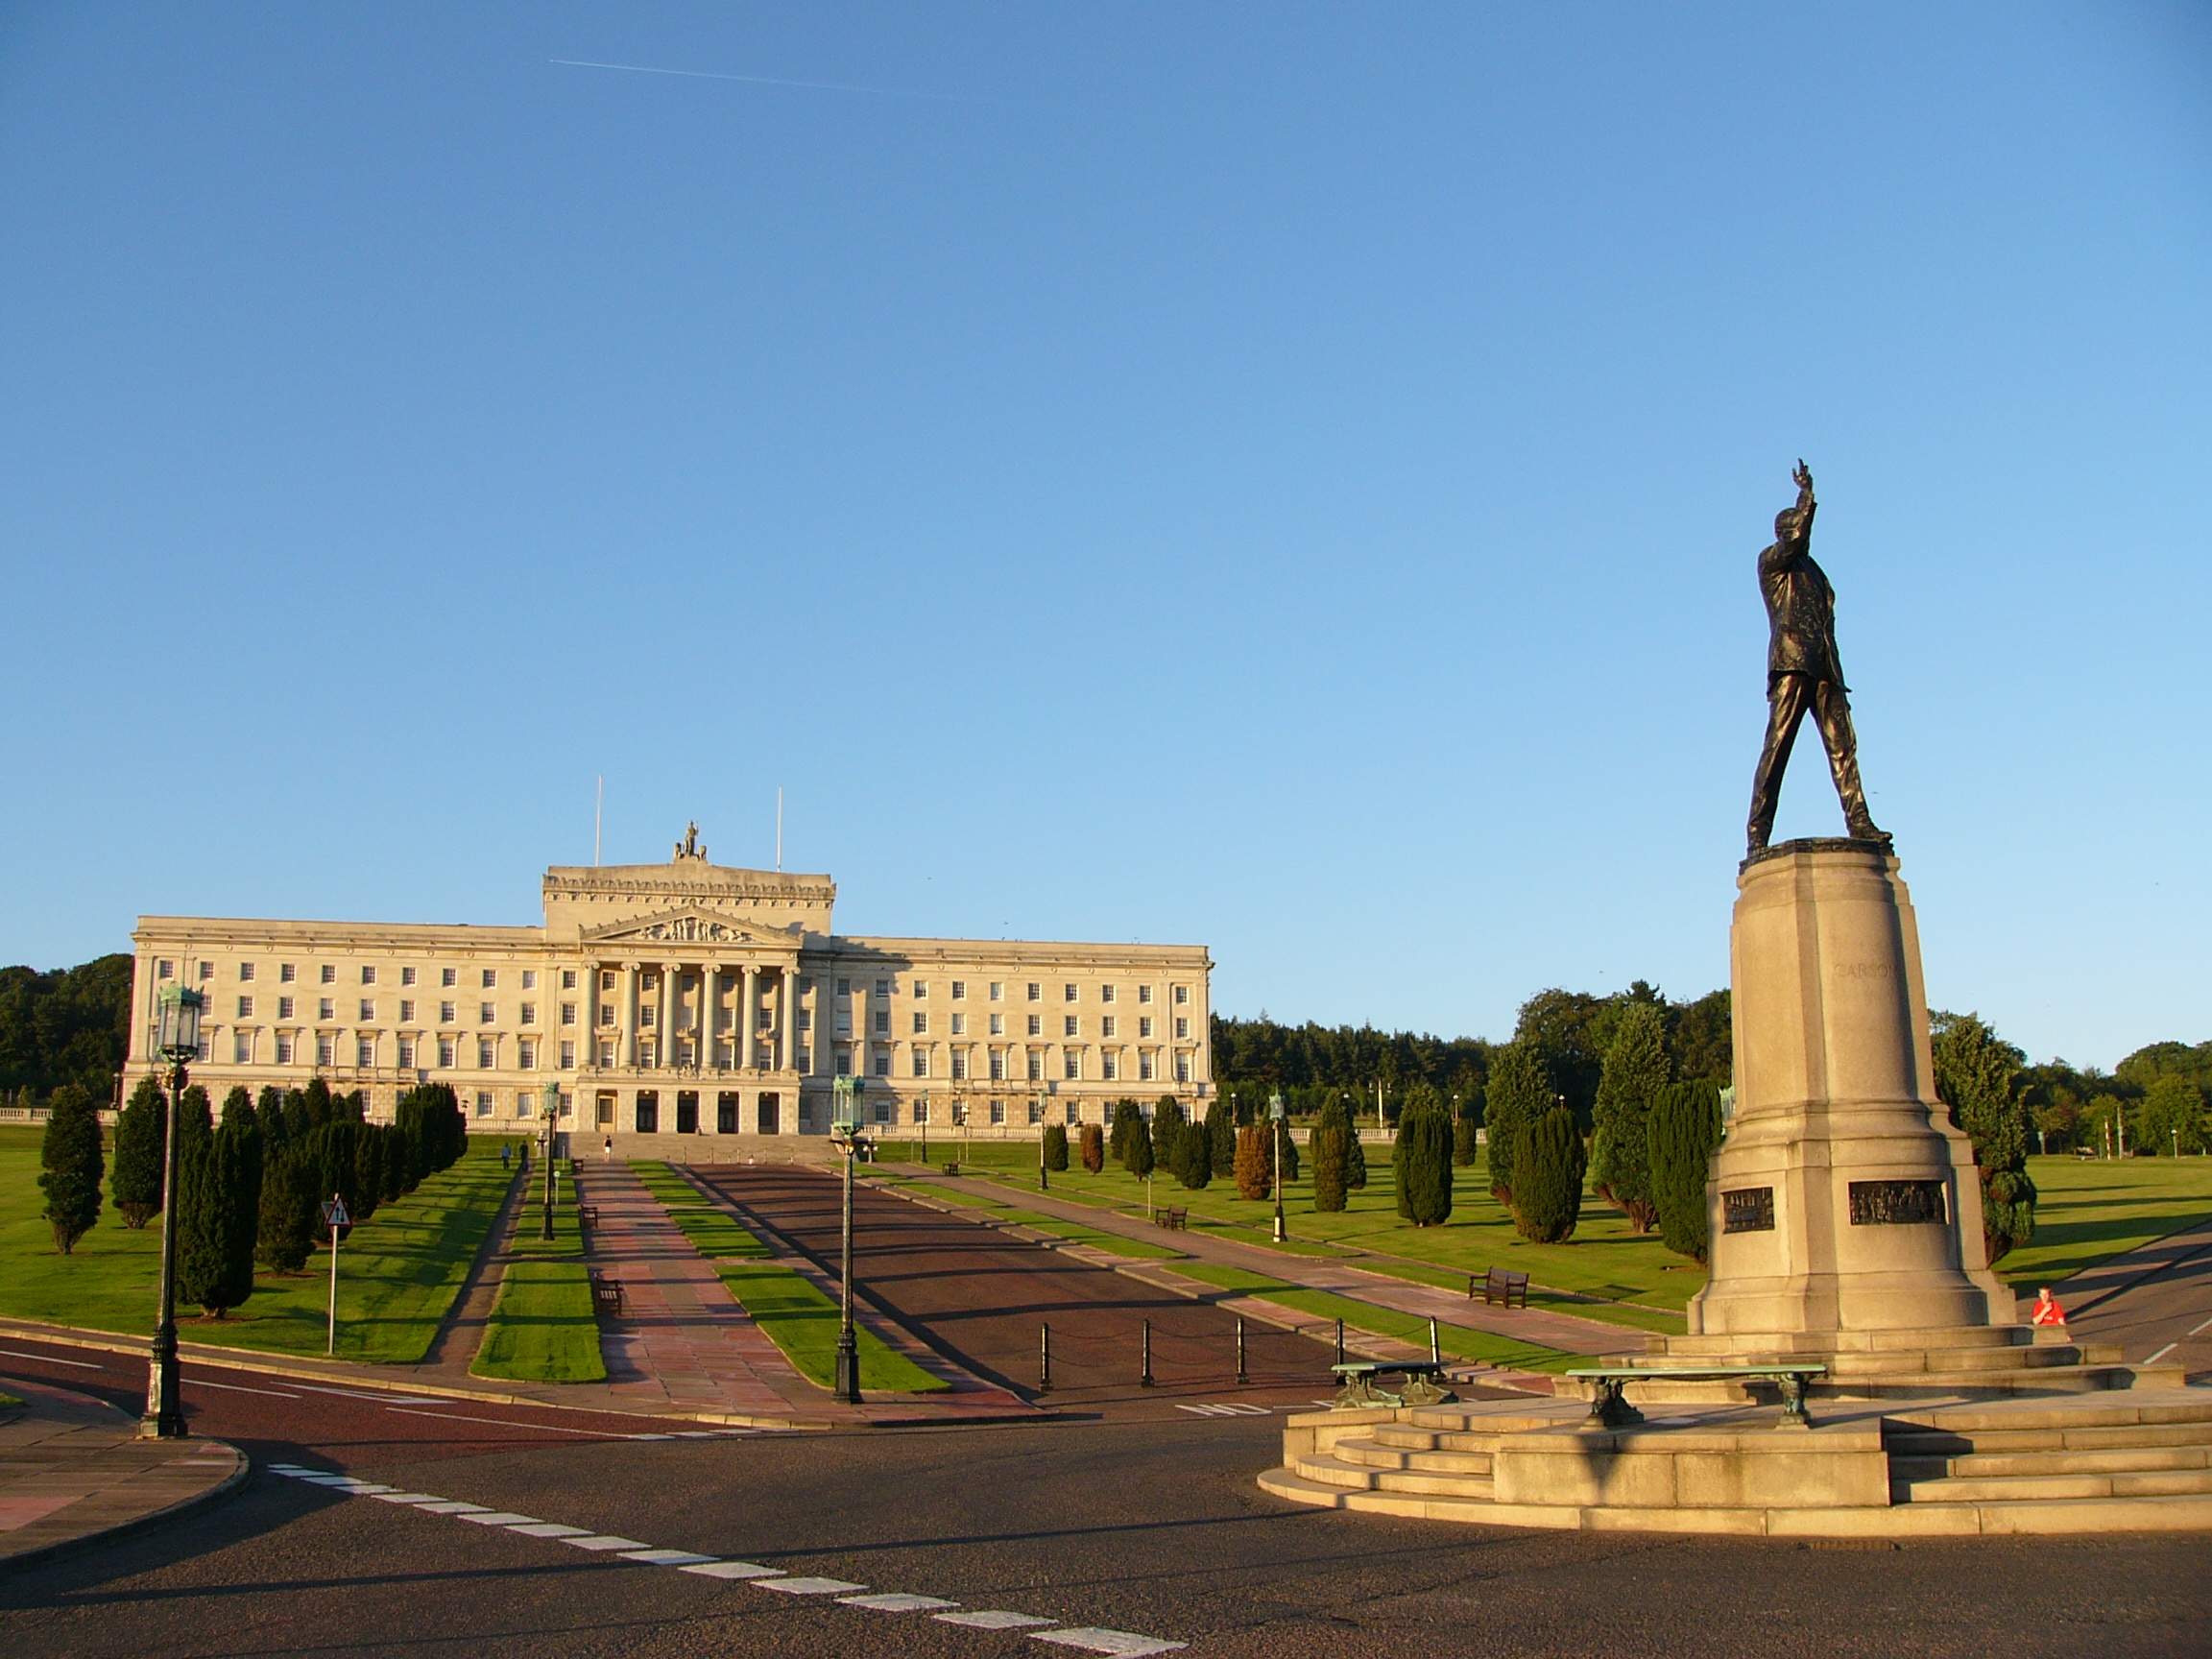 Stormont, home of the Northern Ireland Assembly. Photo credit: flickr user Robert Young http://tinyurl.com/y8wzlvju Creative Commons license https://creativecommons.org/licenses/by/2.0/